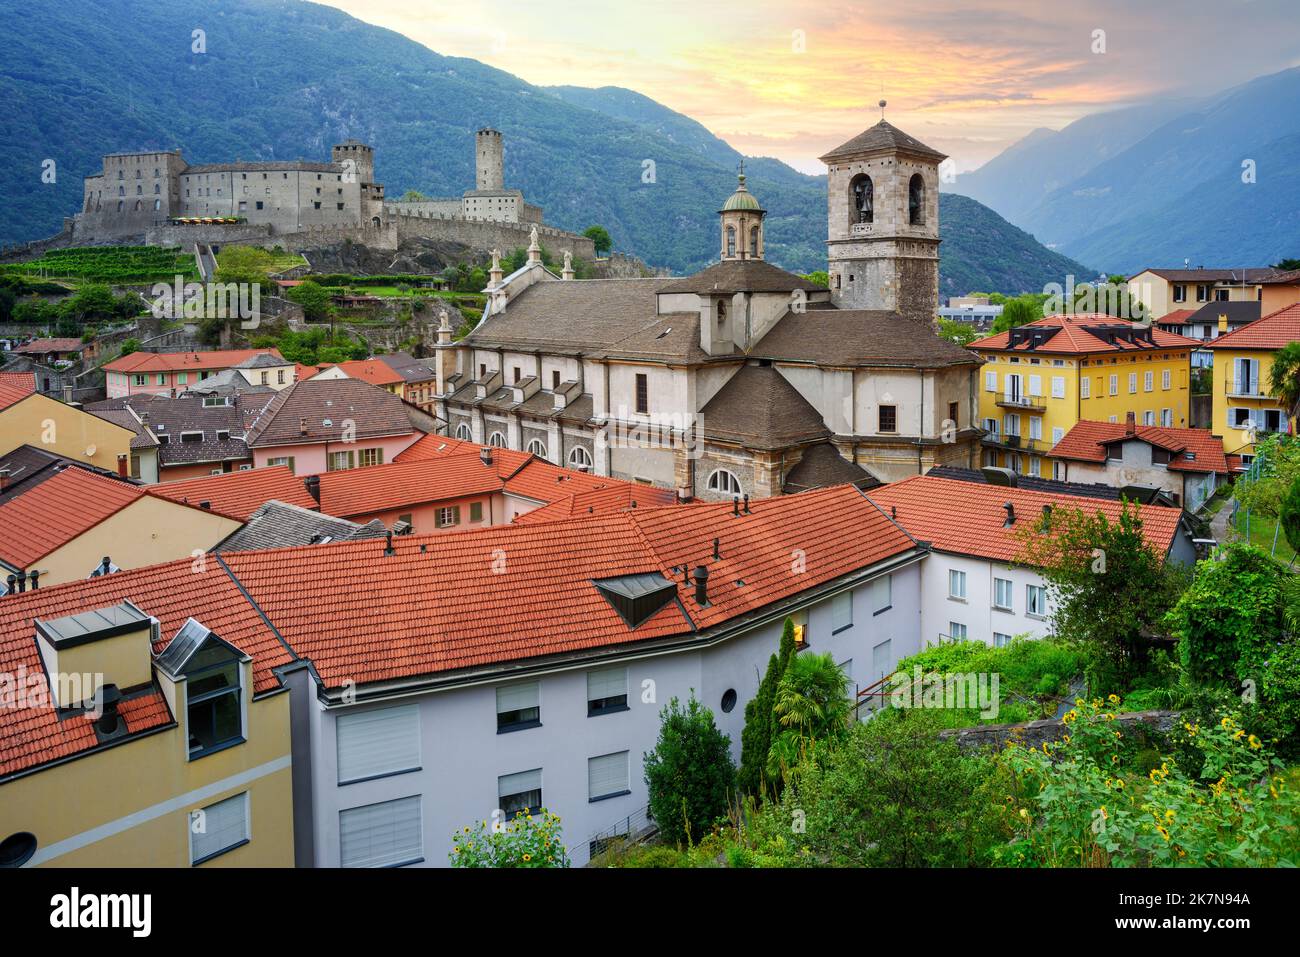 Bellinzona city, view of the historical Old town, the catholic Church, Castelgrande castle and Alps mountains on sunset, Ticino, Switzerland Stock Photo